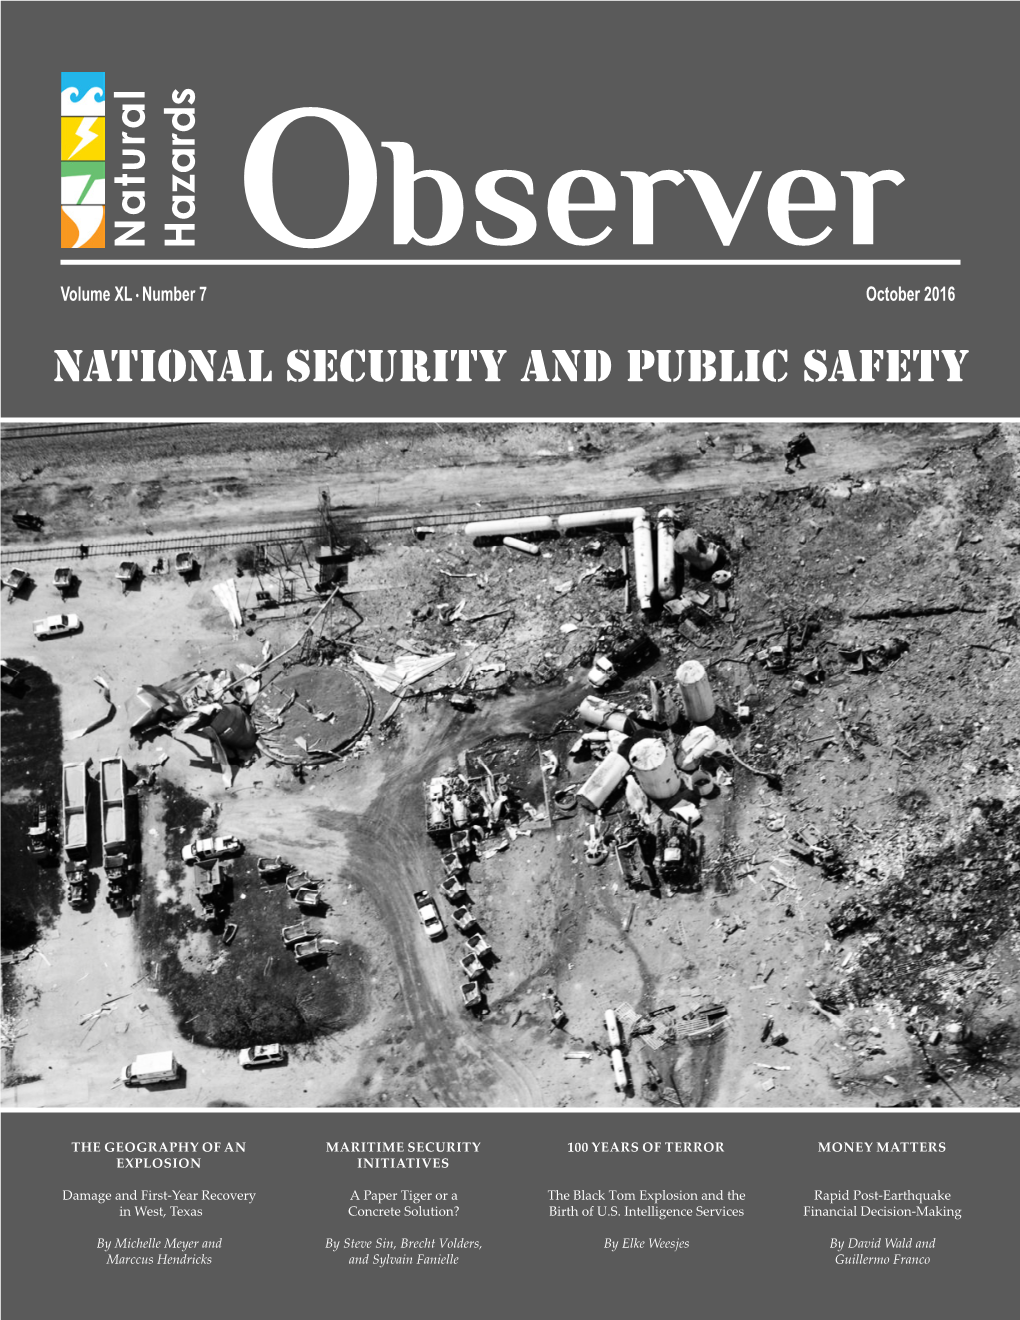 National Security and Public Safety